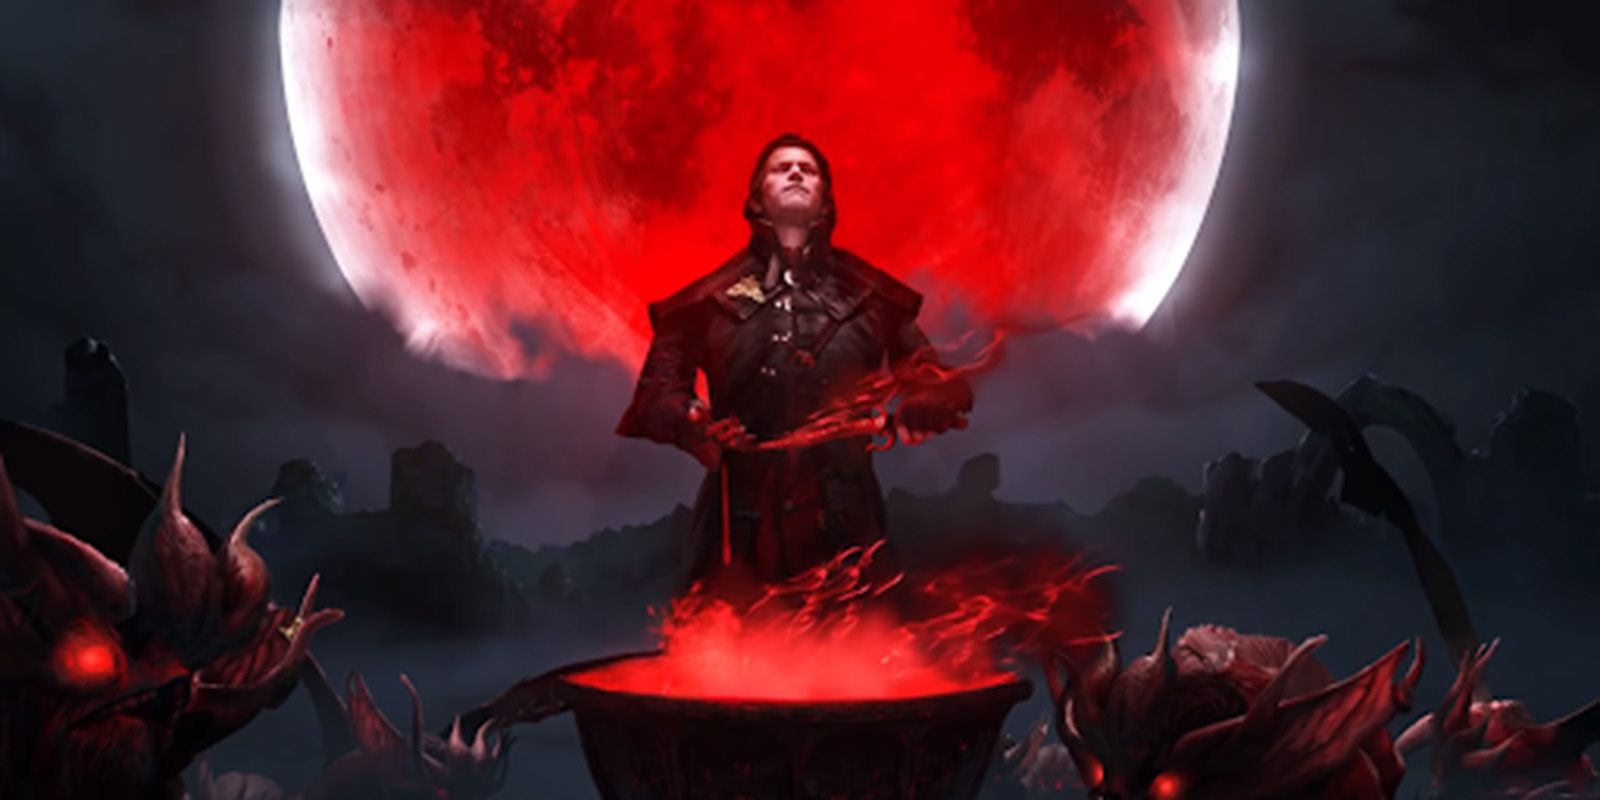 art of a vampire with a basin of blood and a red moon in the background